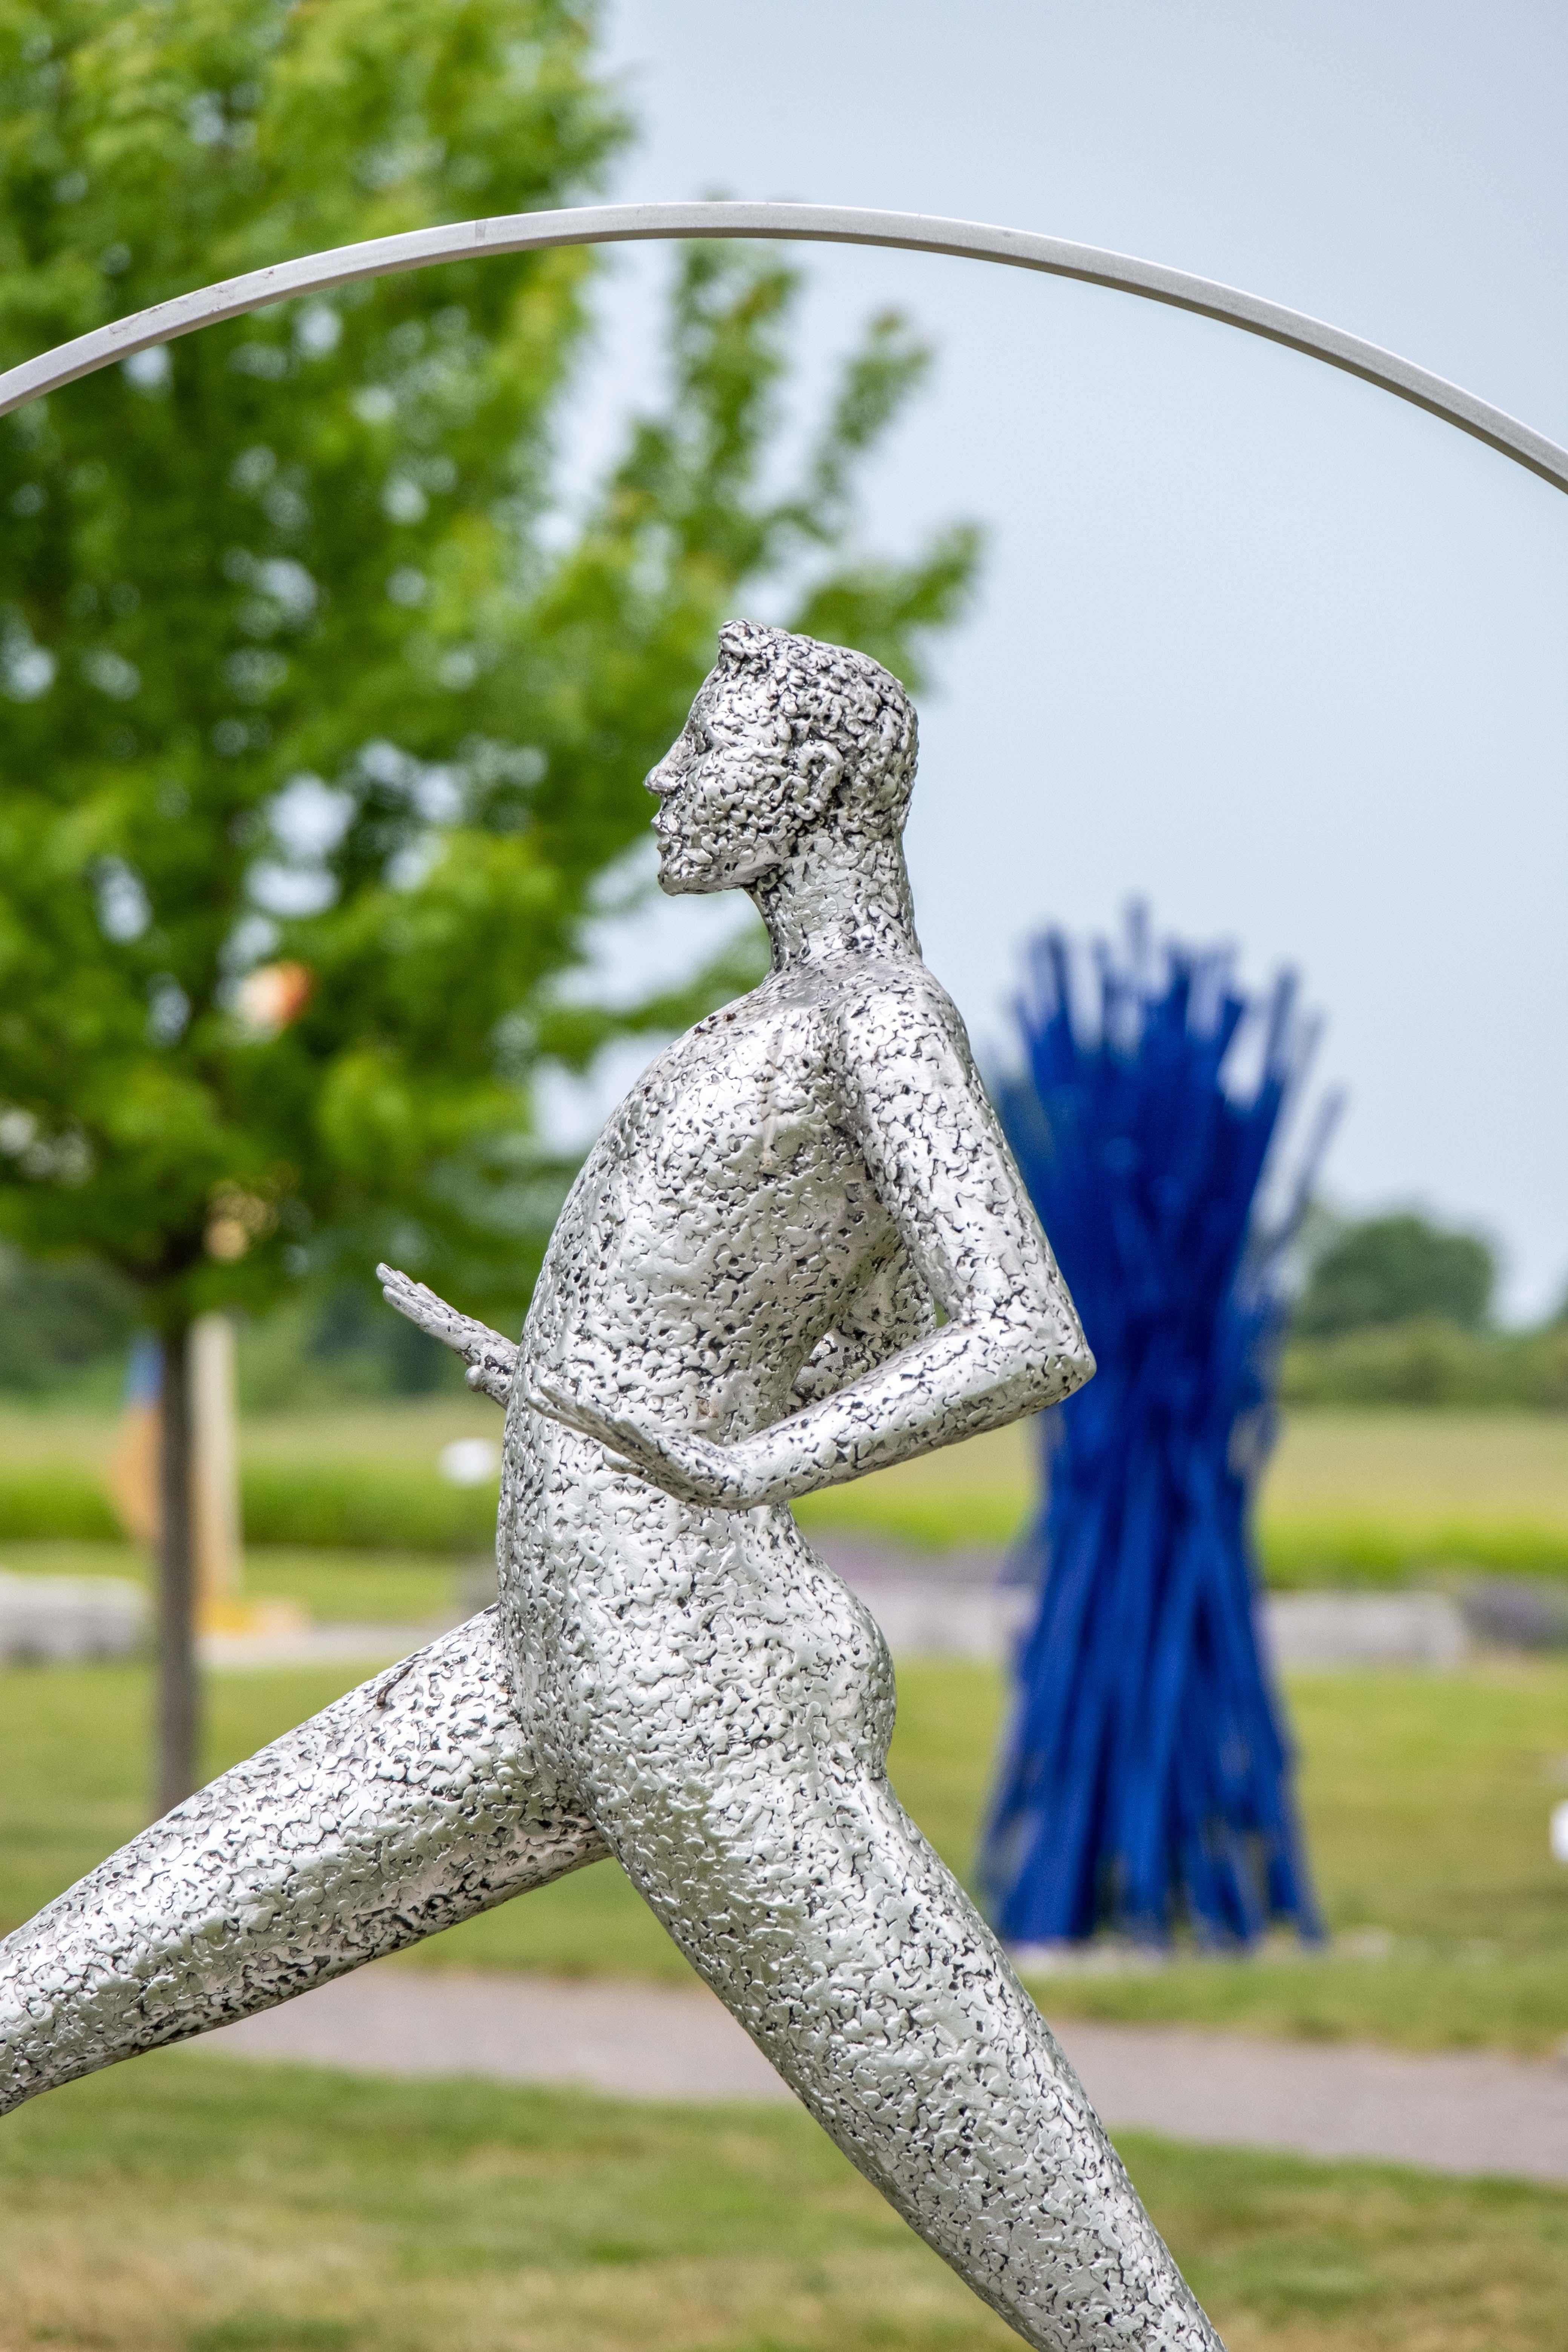 Engaging and playful, Quebec sculptor Paul Duval’s artwork often contemplates the idea of balance and imbalance. ‘Desequilibre’ in French actually means ‘unbalance.’
Here a figure stands, legs set apart and arms out as if trying to maintain balance